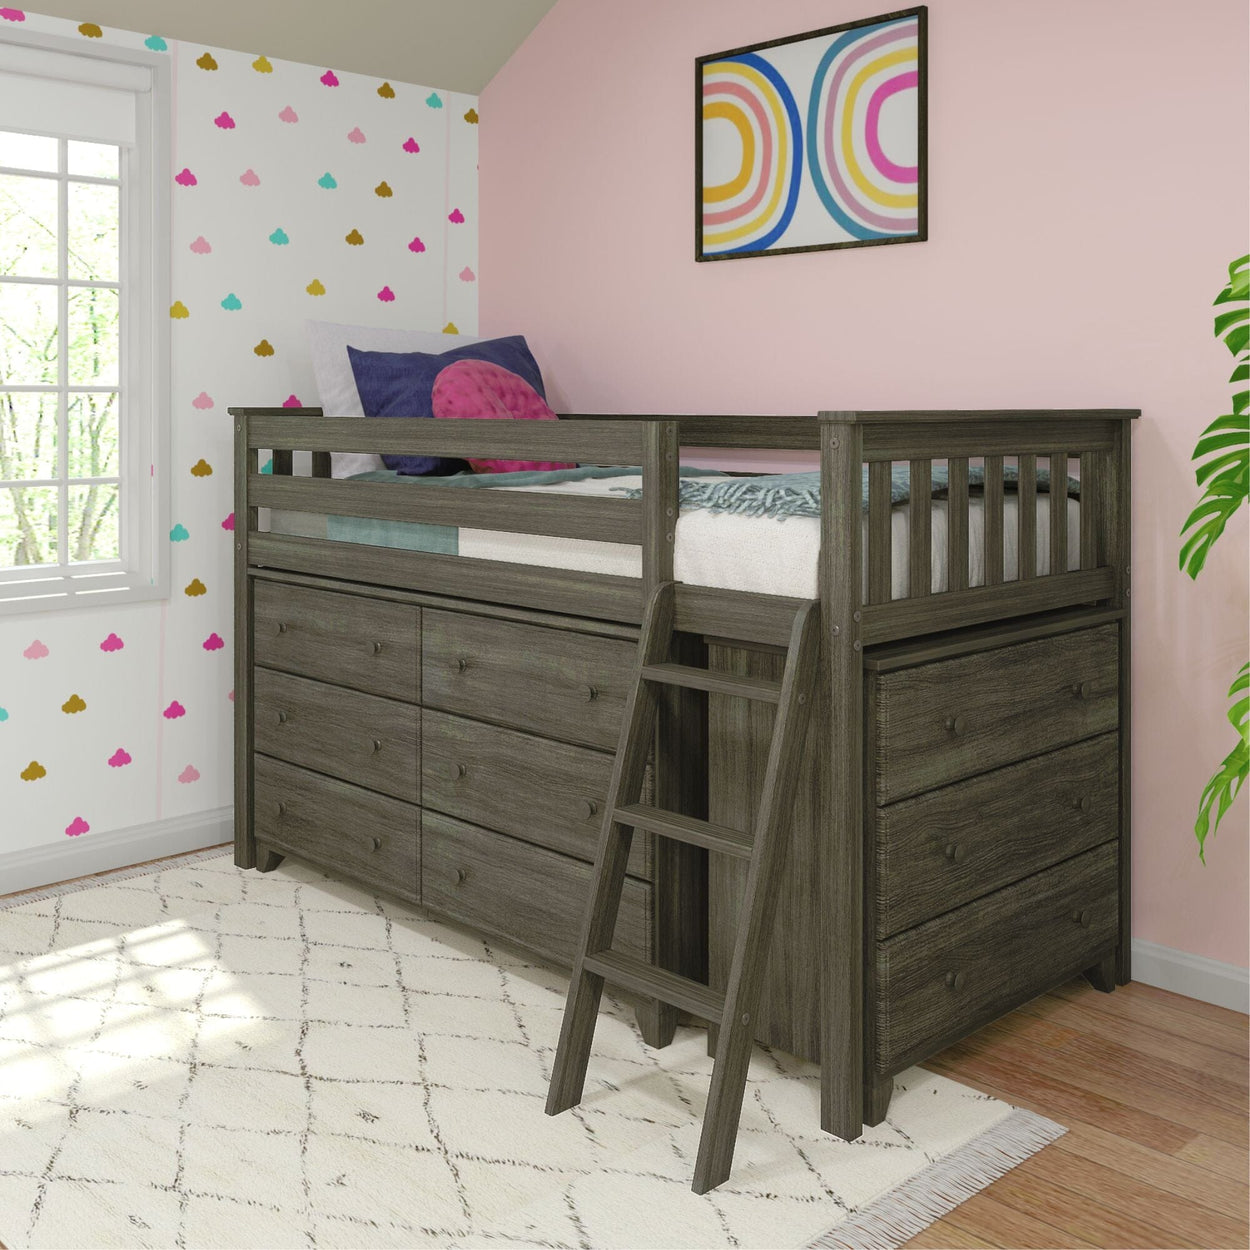 18-3D6D-151 : Loft Beds Twin-Size Low Loft with 3-Drawer and 6-Drawer Dressers, Clay